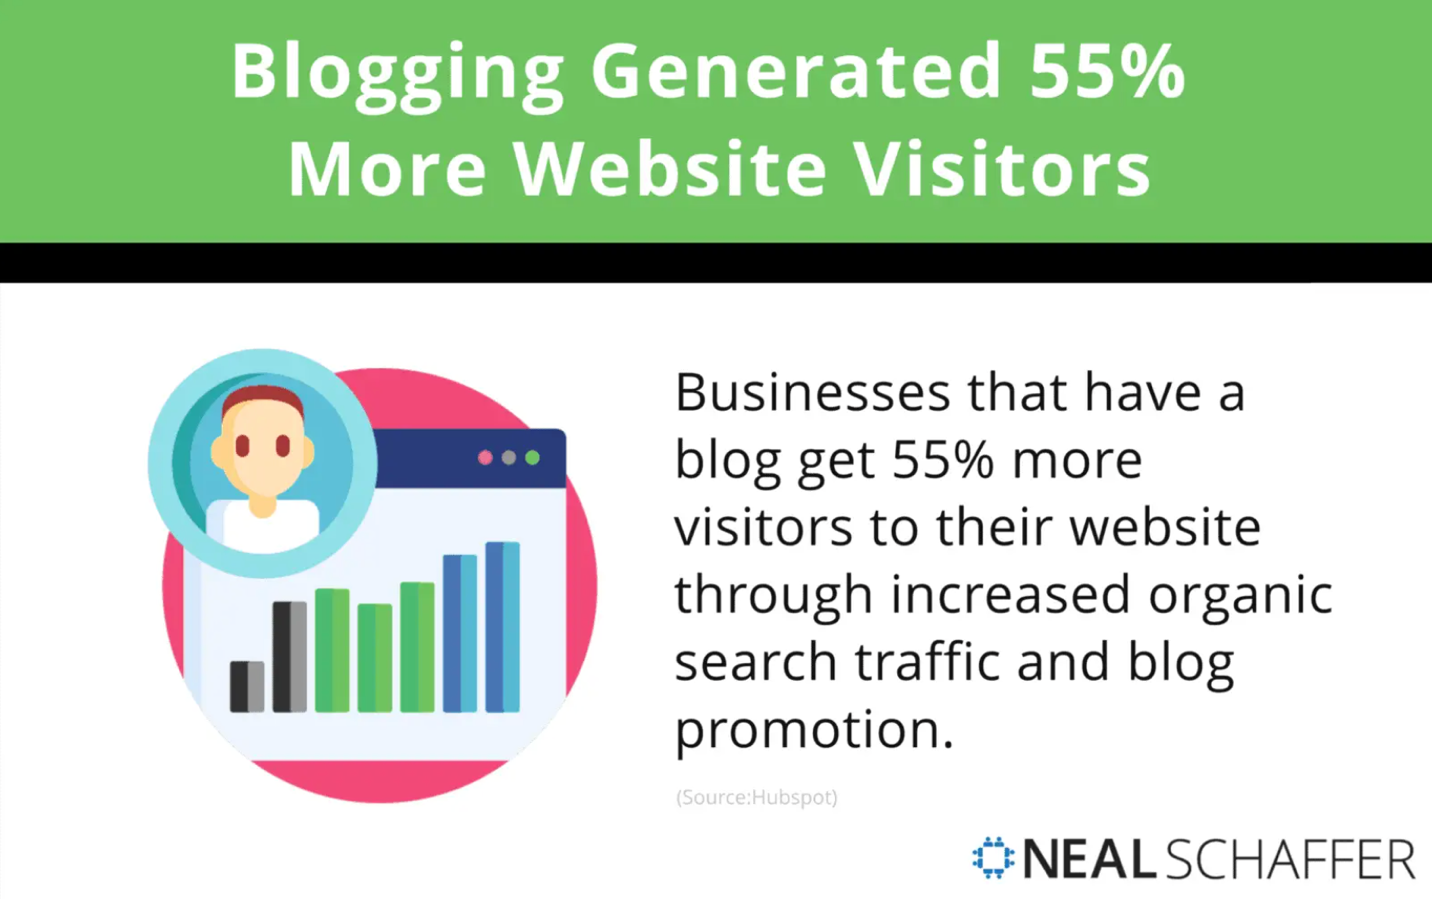 Blogging increases website traffic by 55%